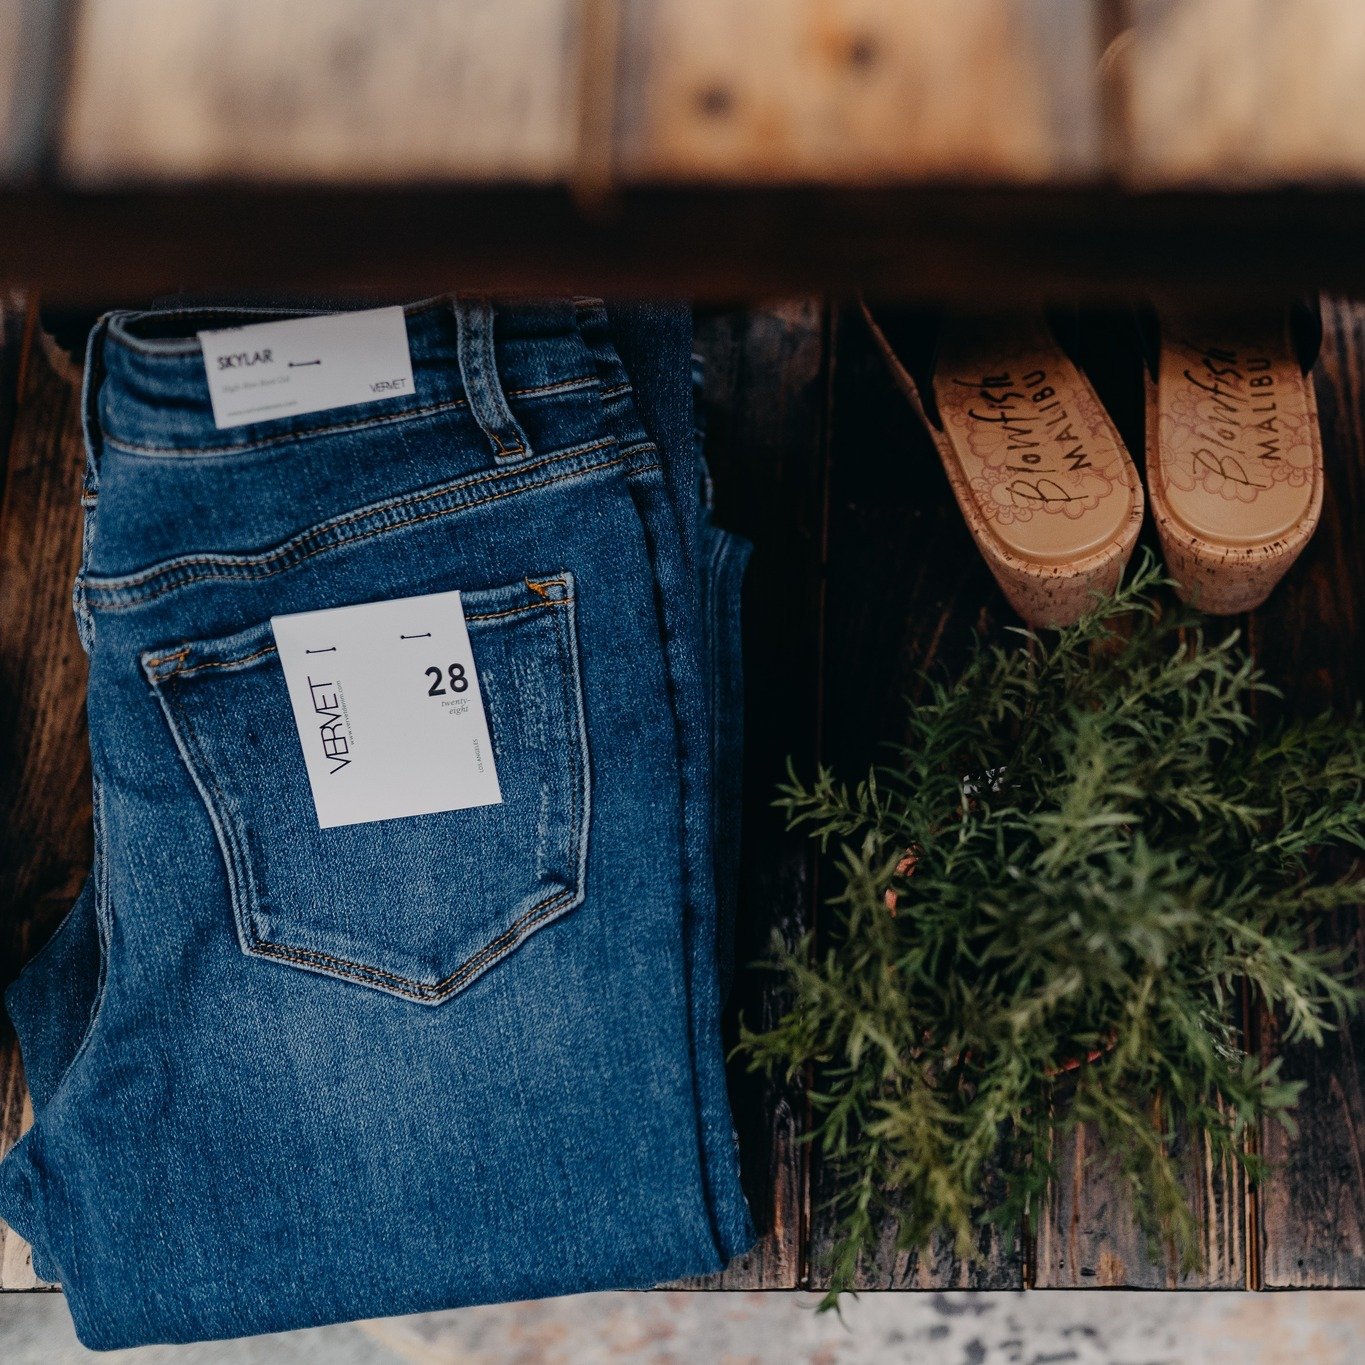 Upgrade your wardrobe with our best, high-quality jeans in stock now! Durable, stylish, and incredibly comfortable&mdash;don&rsquo;t miss out on the perfect fit! 

#mustardseedboutique #jeans #vervet #eauclaire #womensfashion